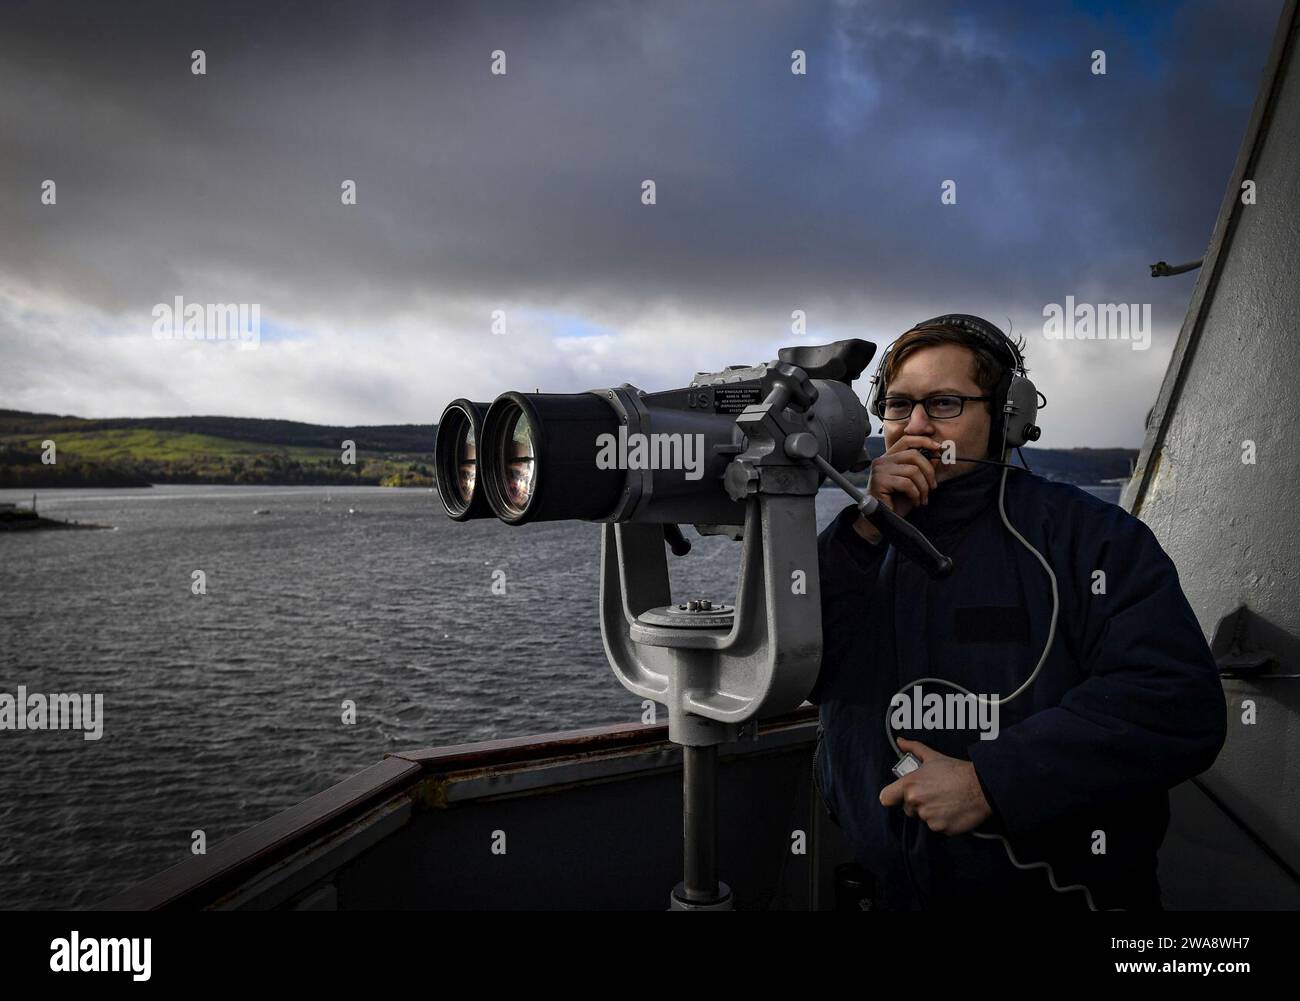 US military forces. 171022UY653-009  FASLANE, United Kingdom (Oct. 22, 2017) Operations Specialist 2nd Class Jonathan Materni stands a port lookout watch aboard the Arleigh Burke-class guided-missile destroyer USS Oscar Austin (DDG 79) Oct. 22, 2017. Oscar Austin is on a routine deployment supporting U.S. national security interests in Europe, and increasing theater security cooperation and forward naval presence in the U.S. 6th Fleet area of operations. (U.S. Navy photo by Mass Communication Specialist 2nd Class Ryan Utah Kledzik/Released) Stock Photo